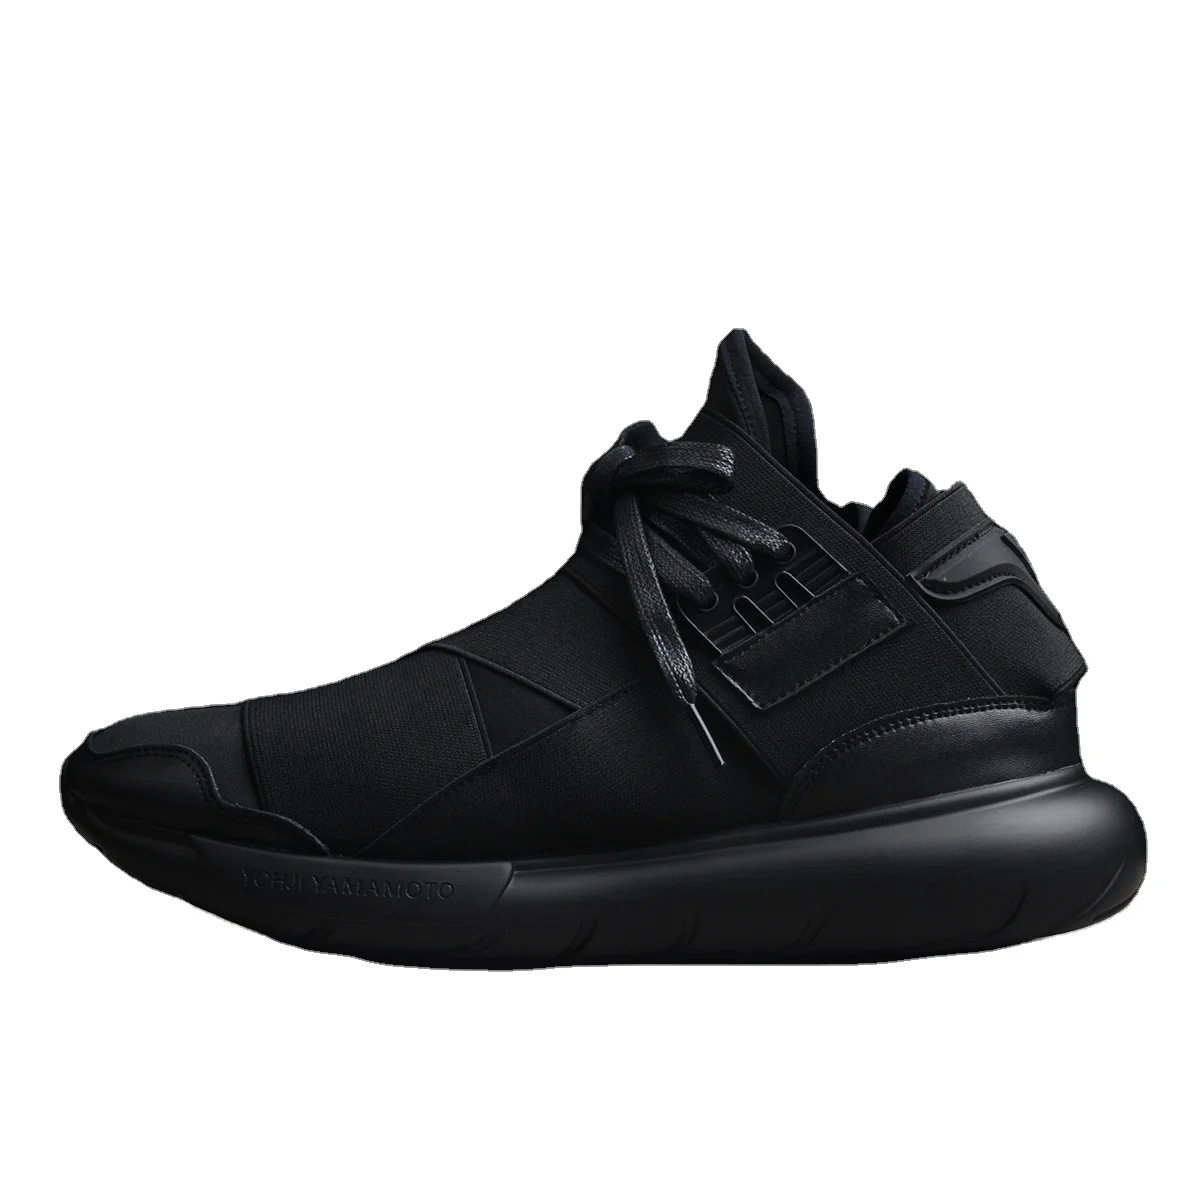 

Adidas Y-3 QASA HIGH running shoes 2021 High Quality Latest Men Women Origina mesh breathable lightweight sneakers, 5 colors